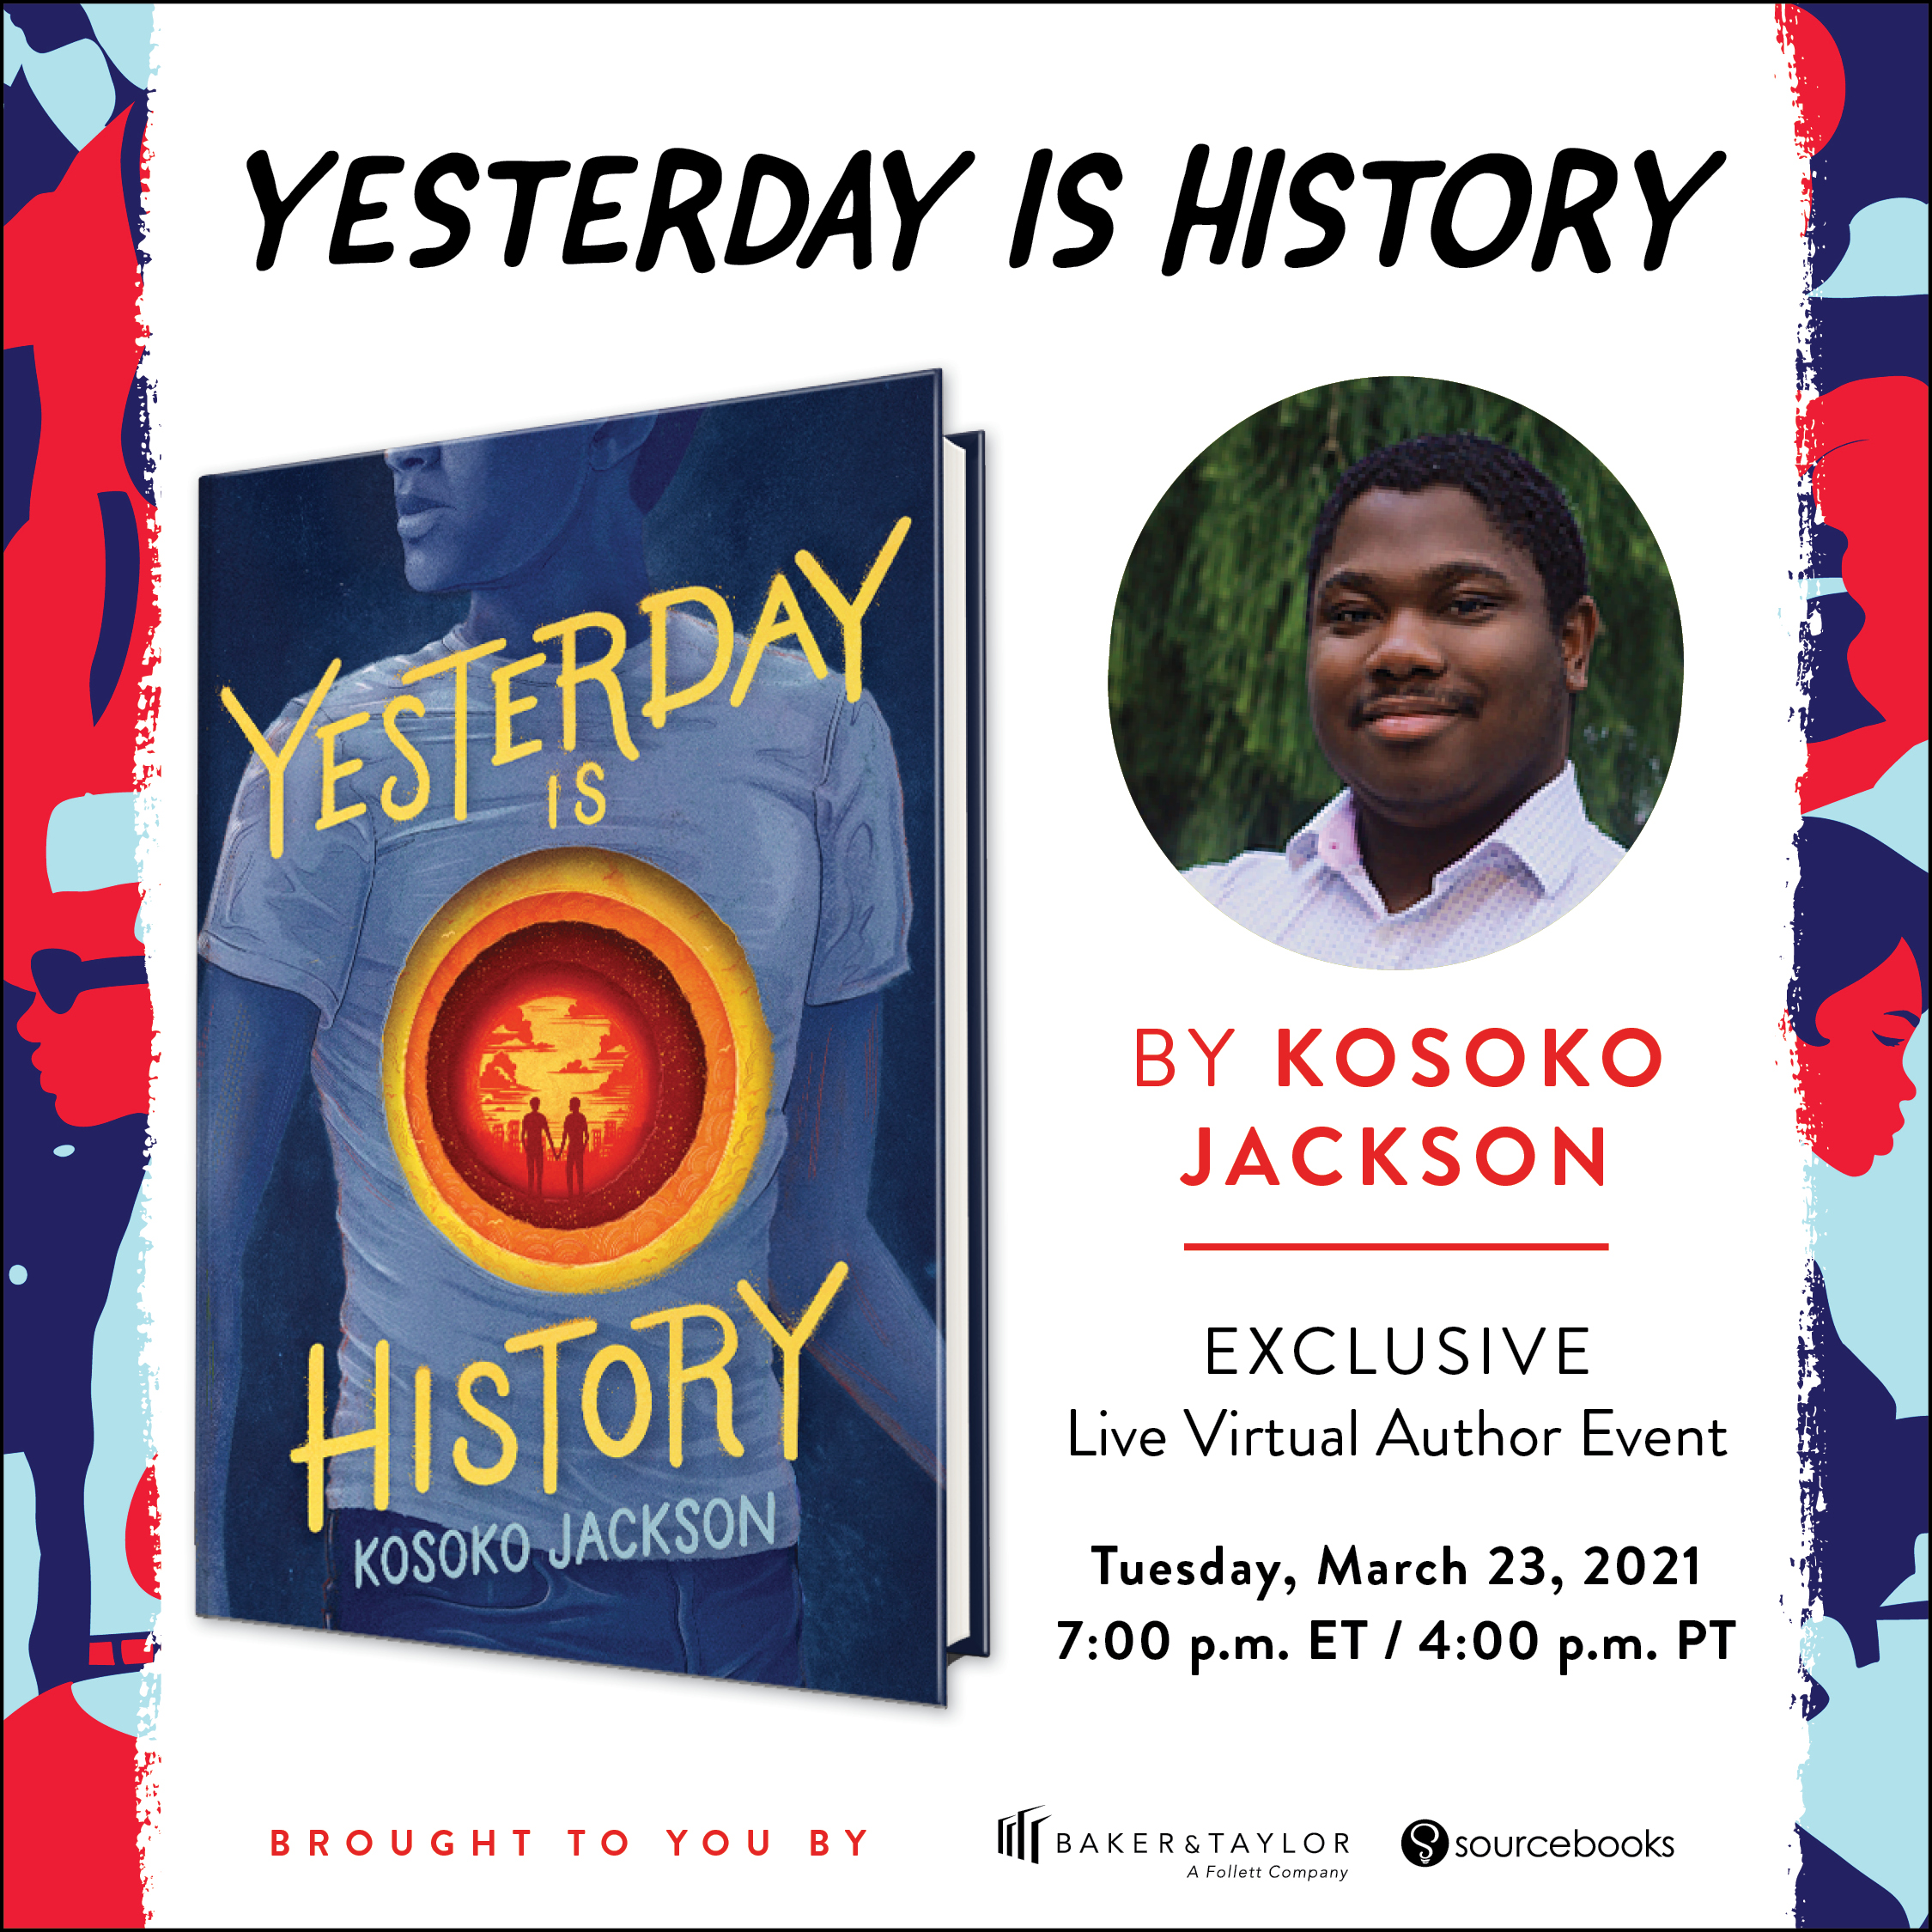 Yesterday is History by Kosoko Jackson book club and live, virtual author event flyer image.